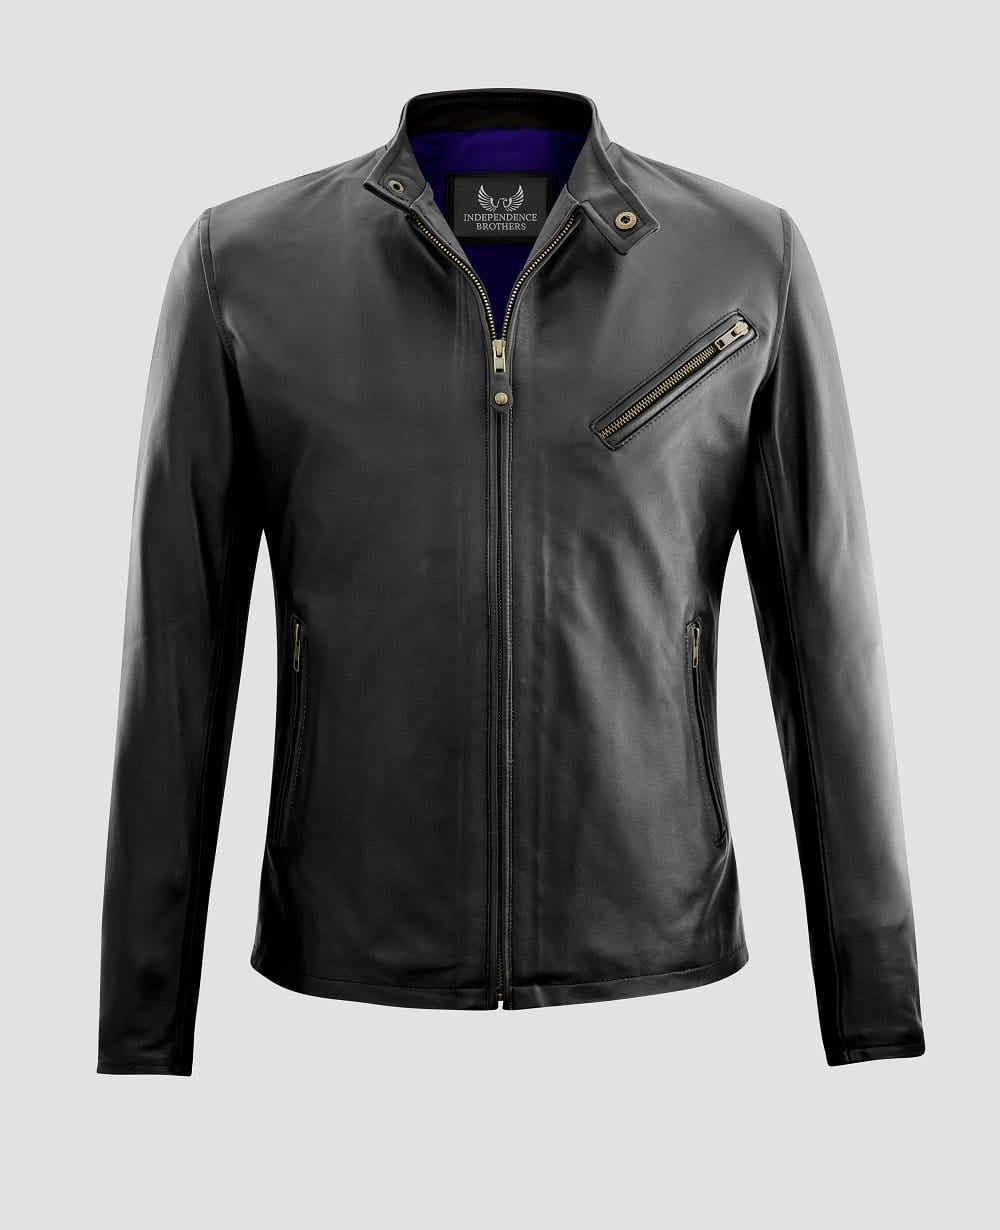 How to Keep Your Leather Jacket Sleeves Rolled Up - Independence Brothers